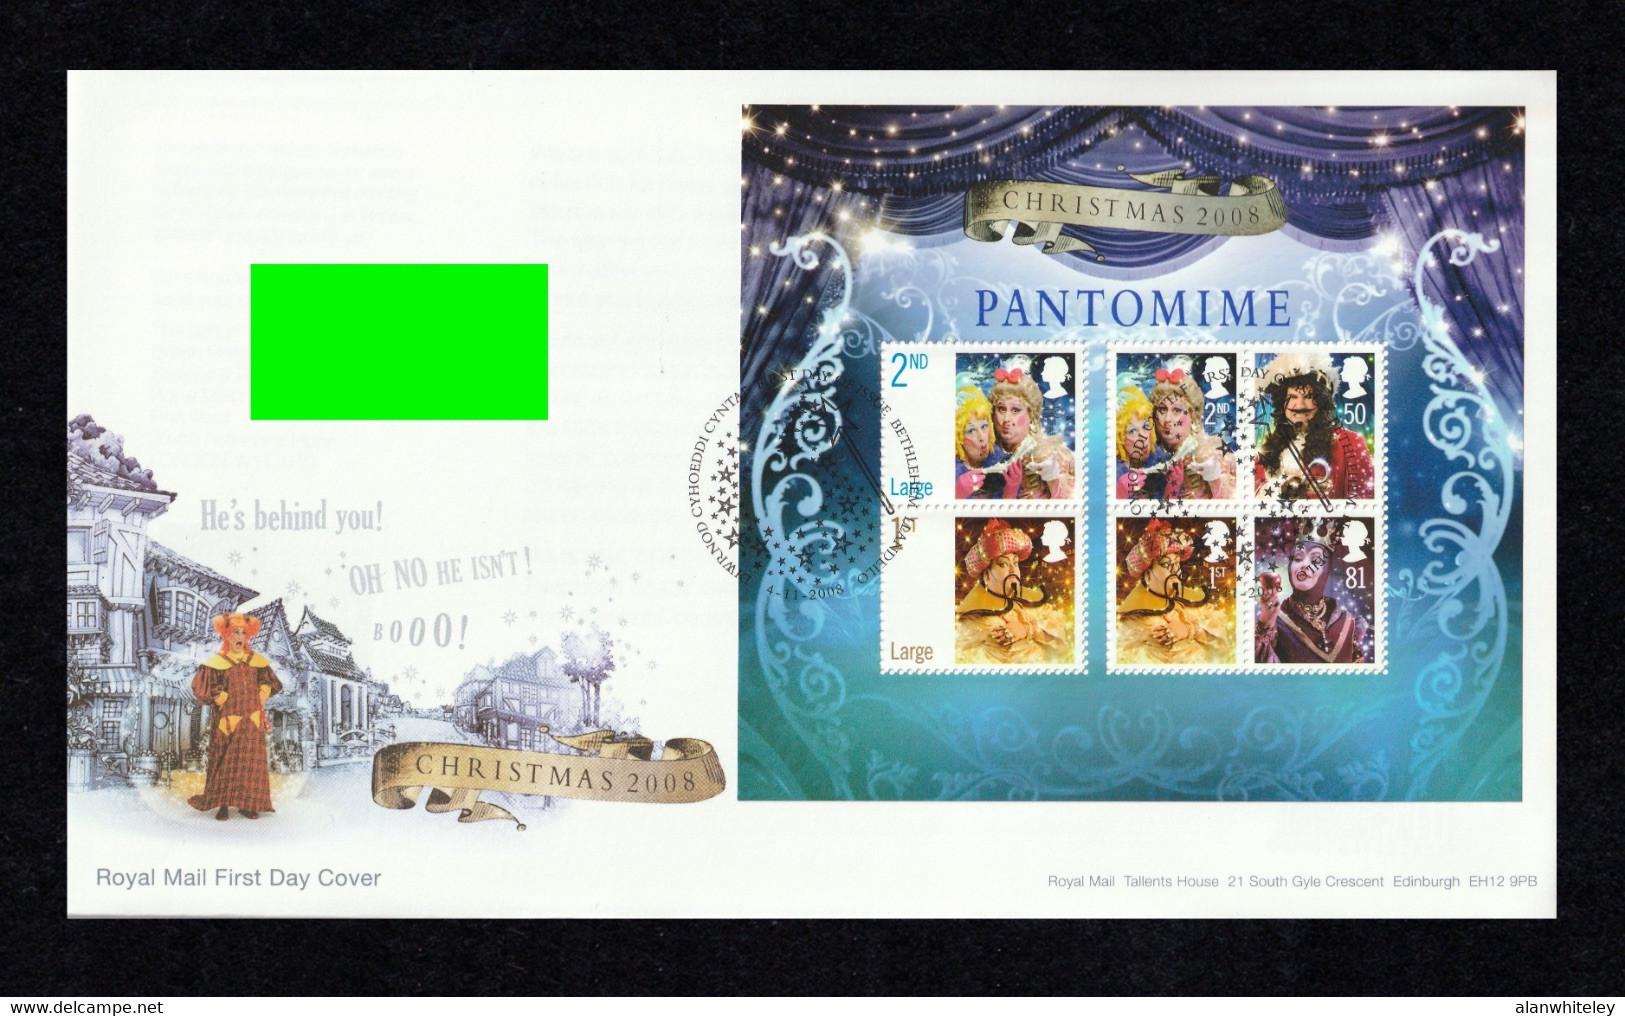 GREAT BRITAIN 2008 Christmas / Pantomimes: Miniature Sheet First Day Cover CANCELLED - 2001-2010 Decimal Issues